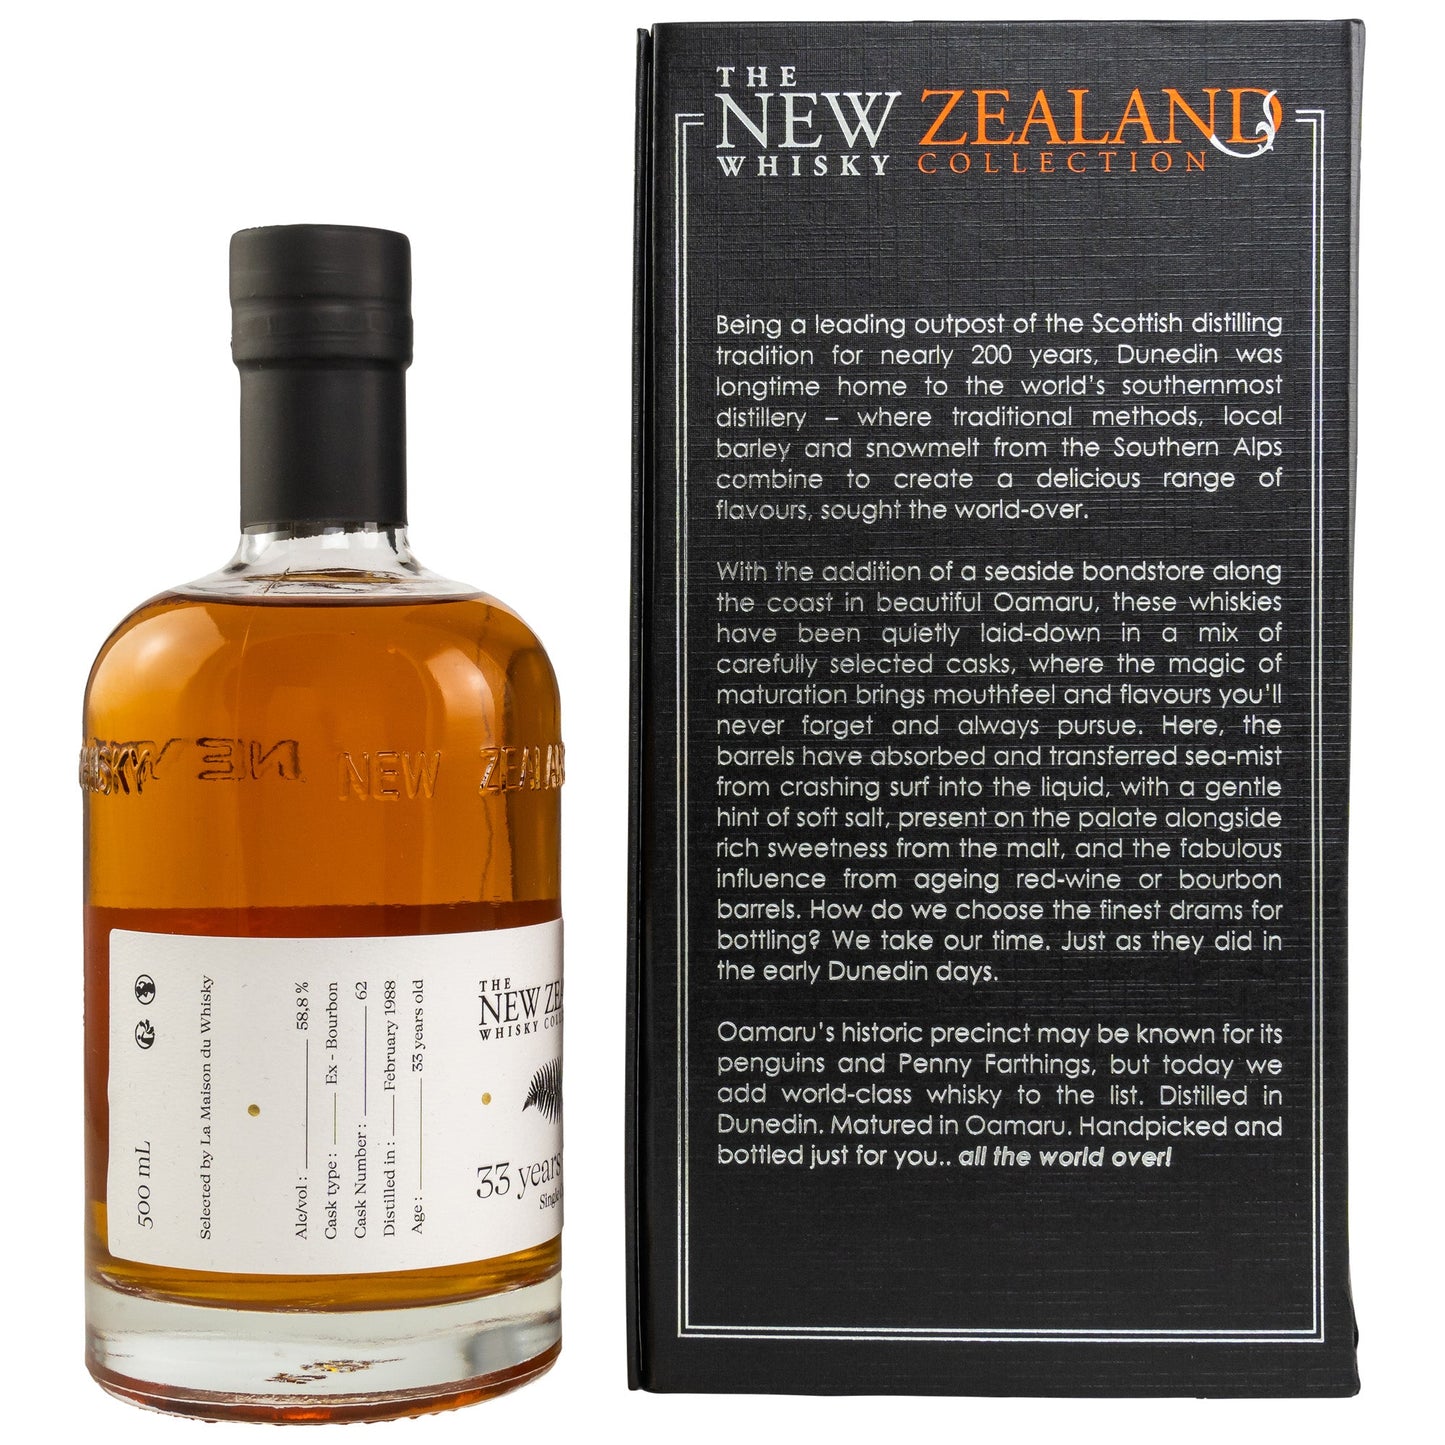 The New Zealand Whisky Collection | 33 Jahre | 1988/2021 | Single Cask #62 | New Zealand Whisky | 0,5l | 58,8%GET A BOTTLE